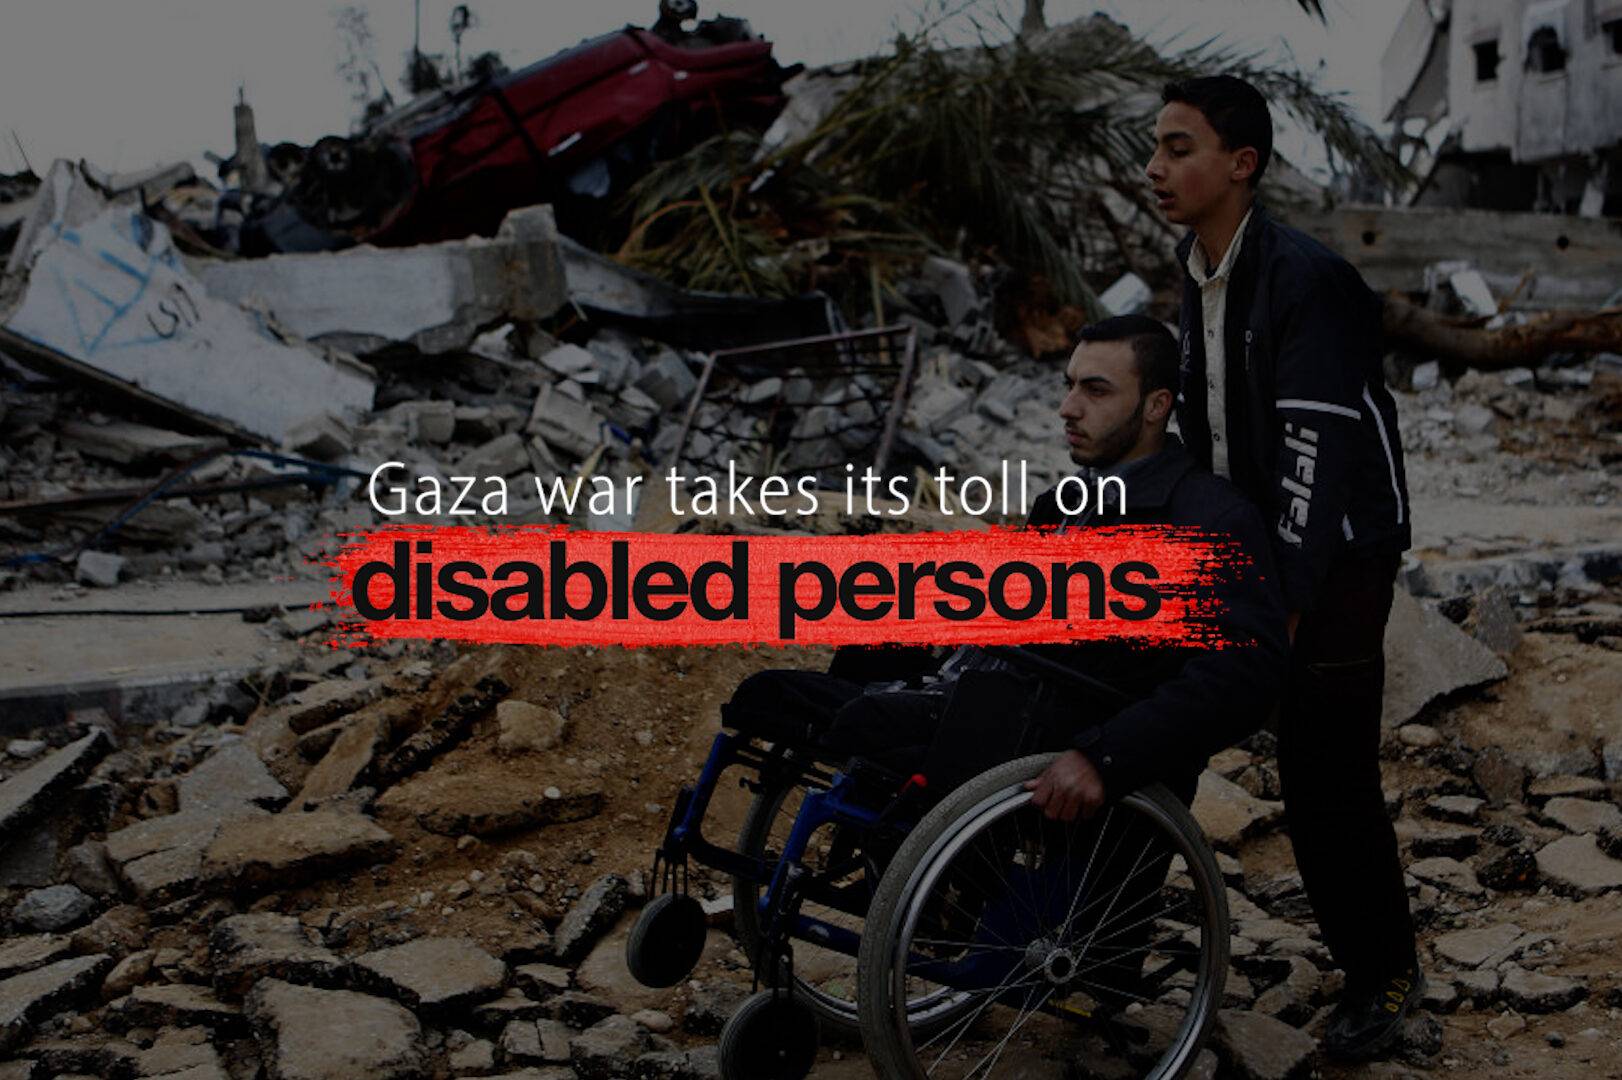 Thumbnail - Israeli air strikes leave Gaza's disabled population in dire conditions